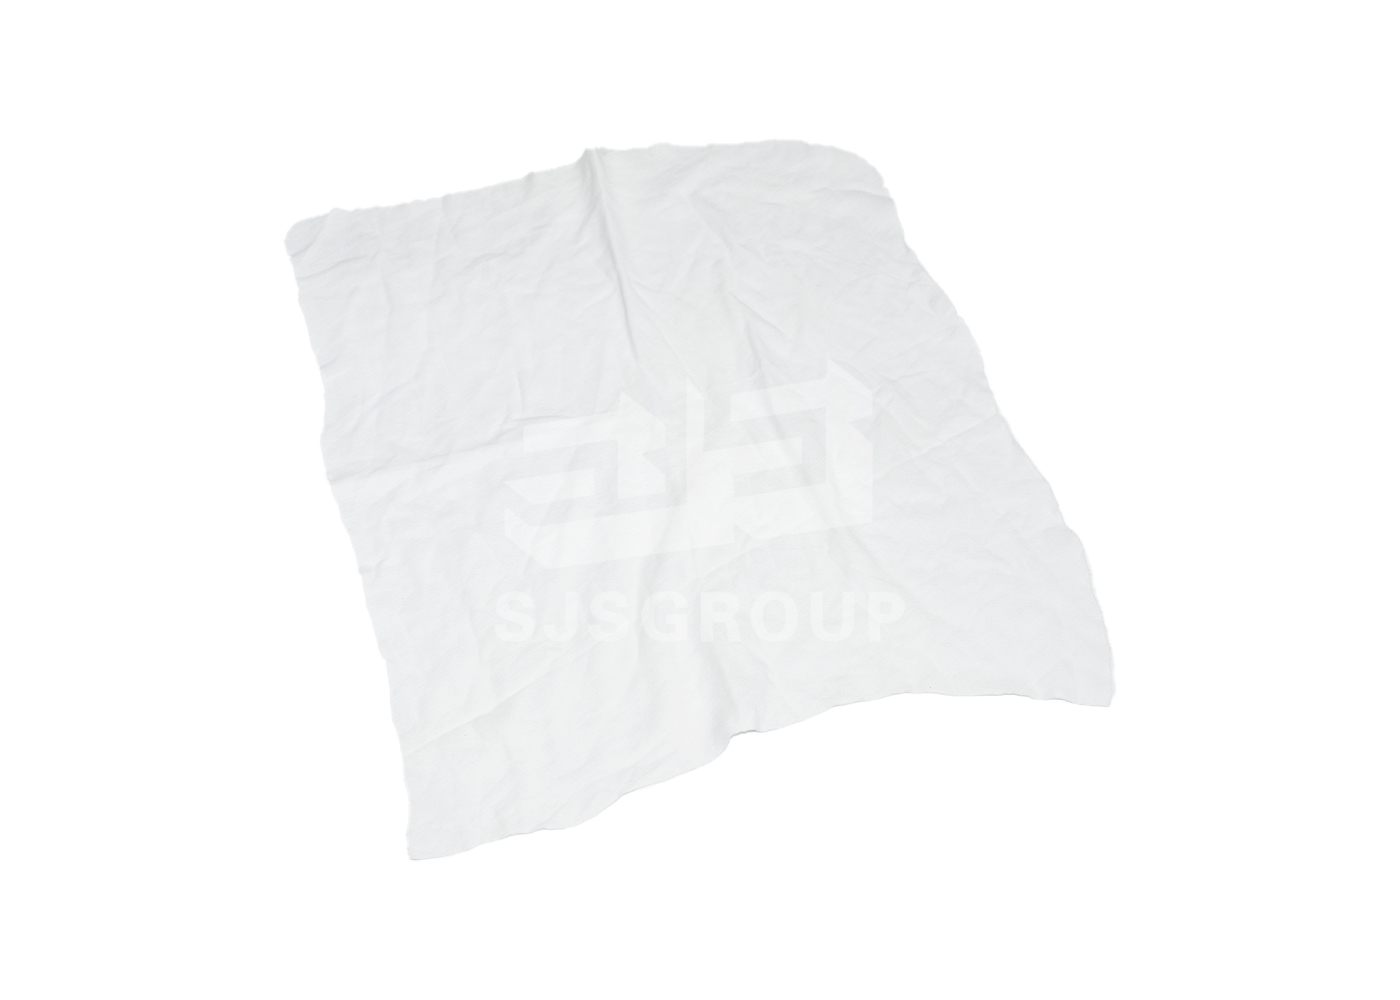 New White Cotton Rags-White cotton rags new(Standard Size)